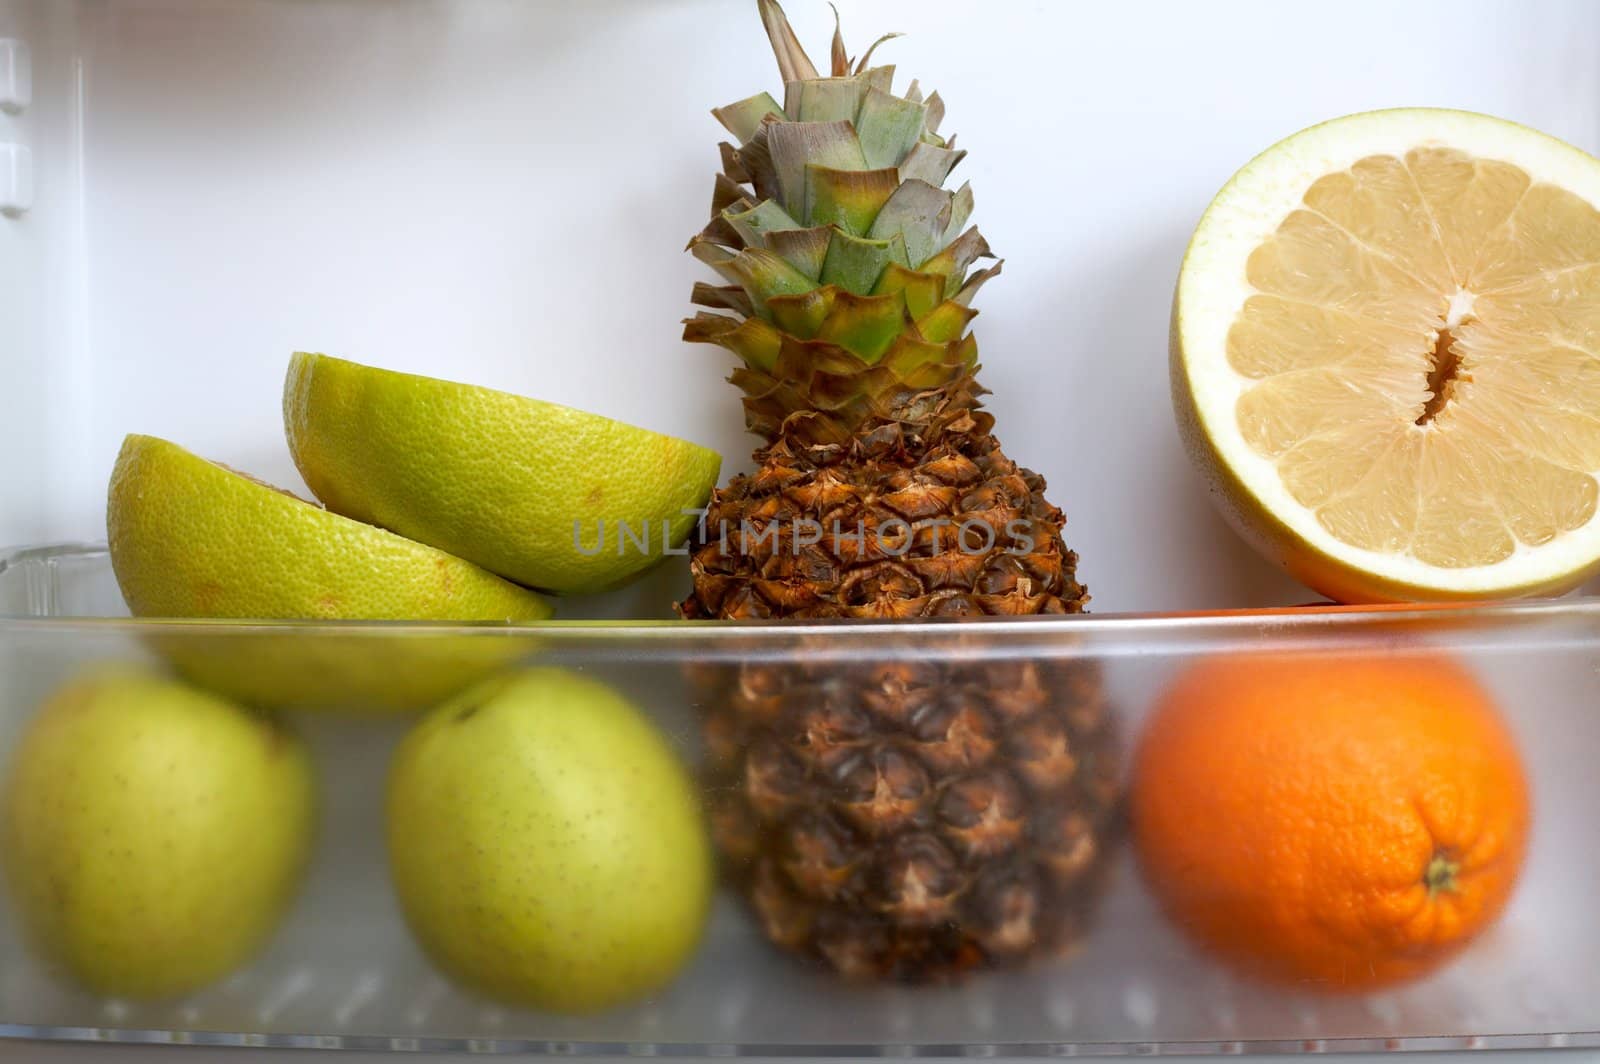 An image of fruits in a refrigerator